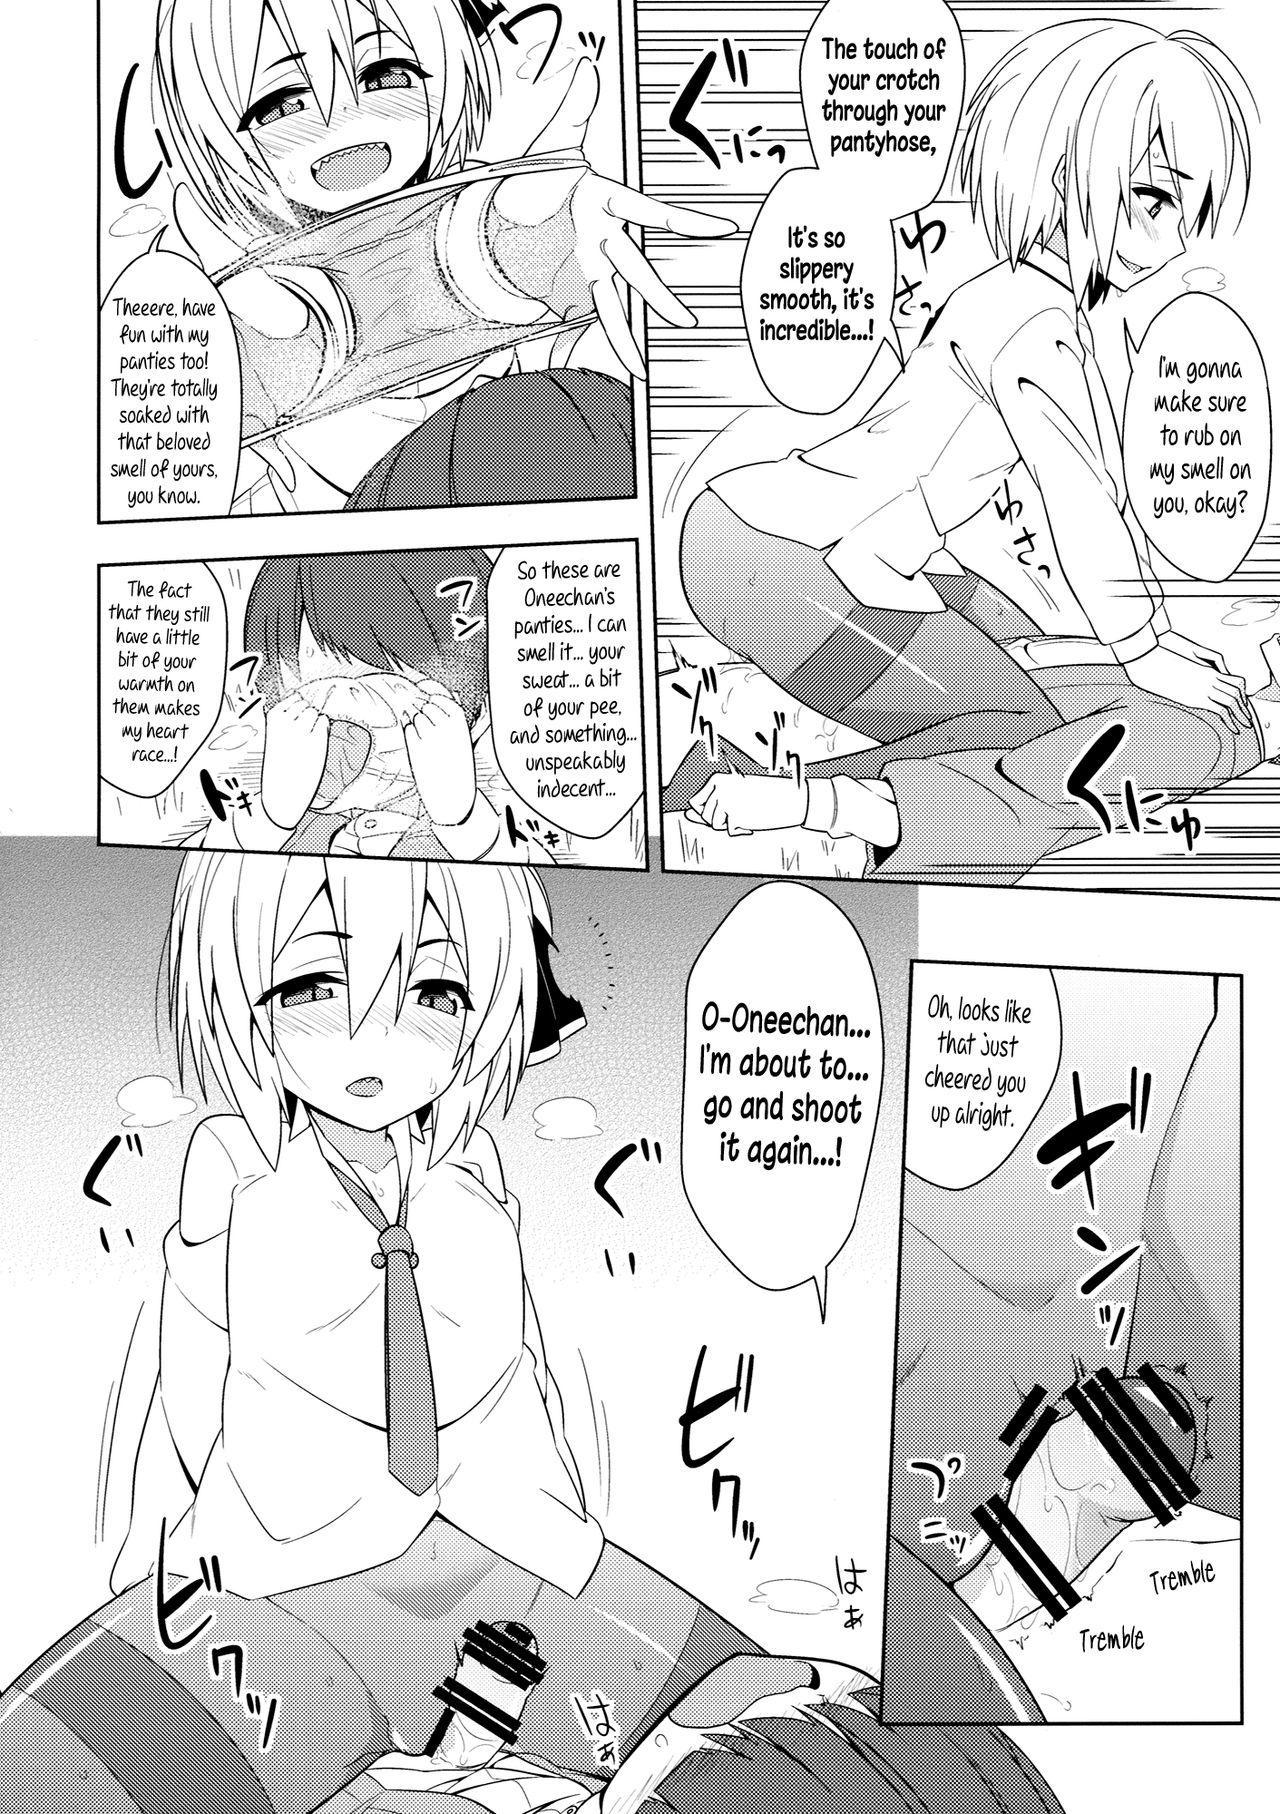 Realitykings Rumia Aratta？| Have you washed, Rumia? - Touhou project Bigbooty - Page 13